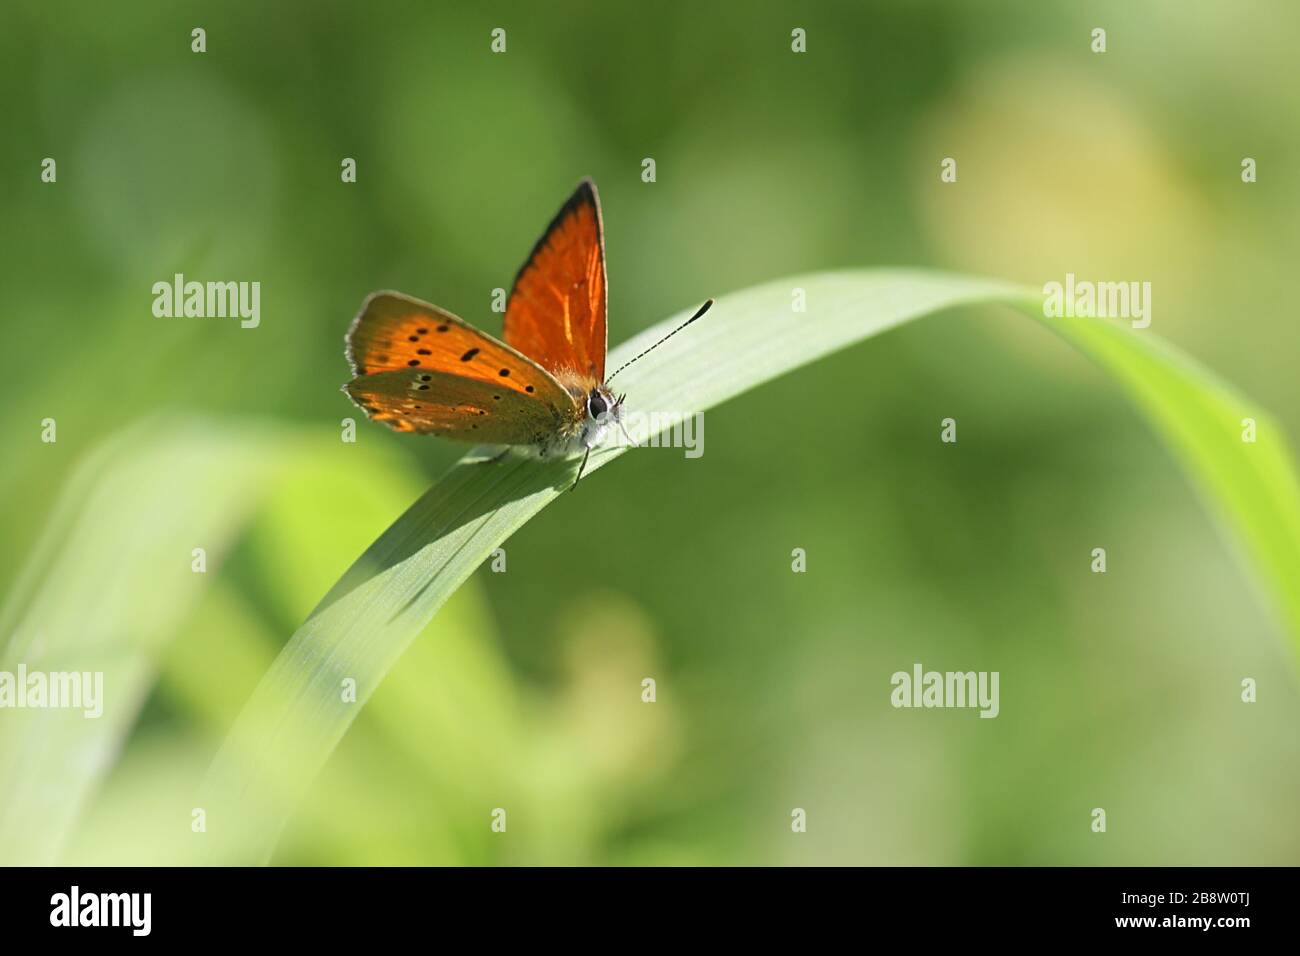 Lycaena virgaureae, known as scarce copper, a butterfly from Finland Stock Photo